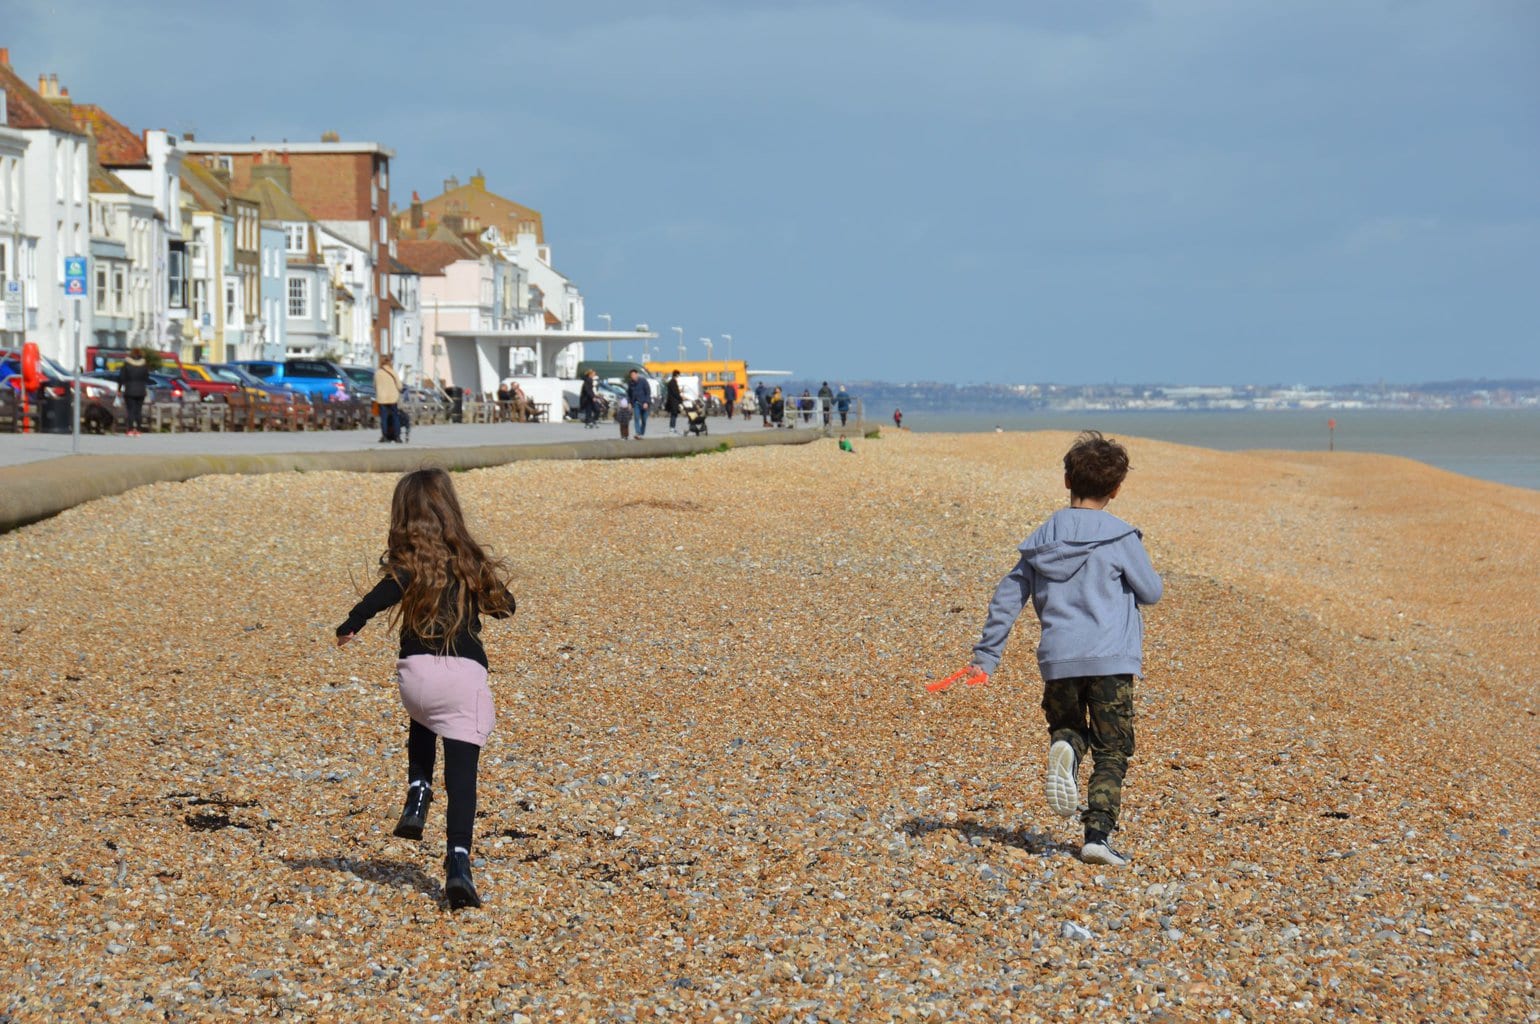 8 things to do with kids in Deal, Kent